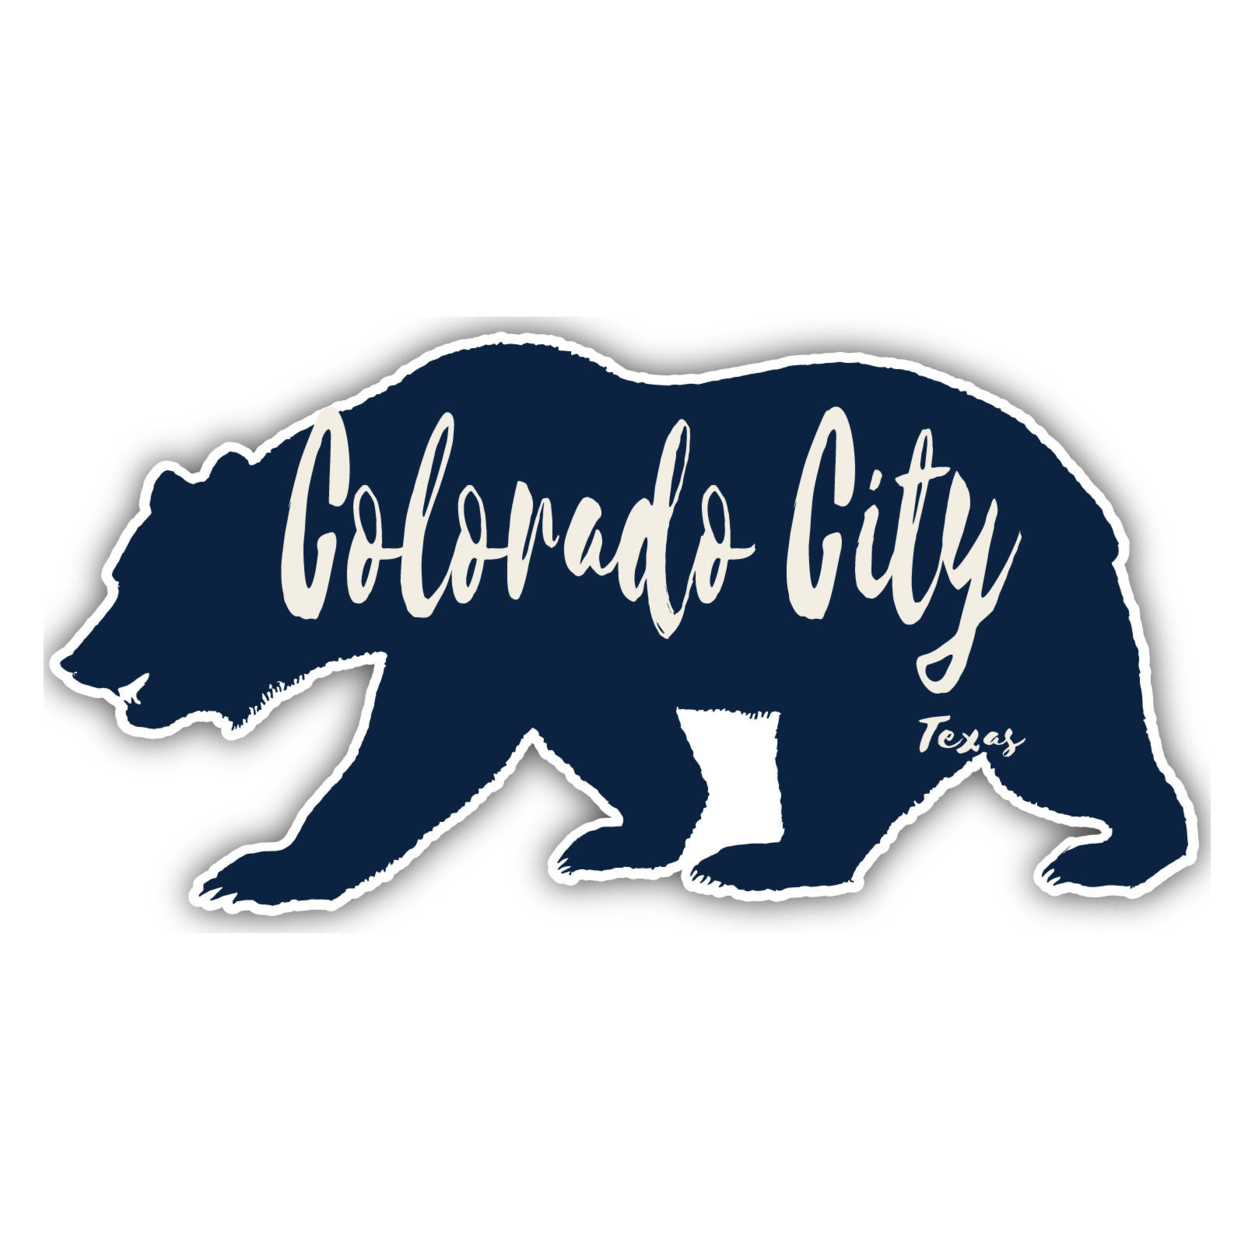 Colorado City Texas Souvenir Decorative Stickers (Choose Theme And Size) - 4-Pack, 8-Inch, Great Outdoors